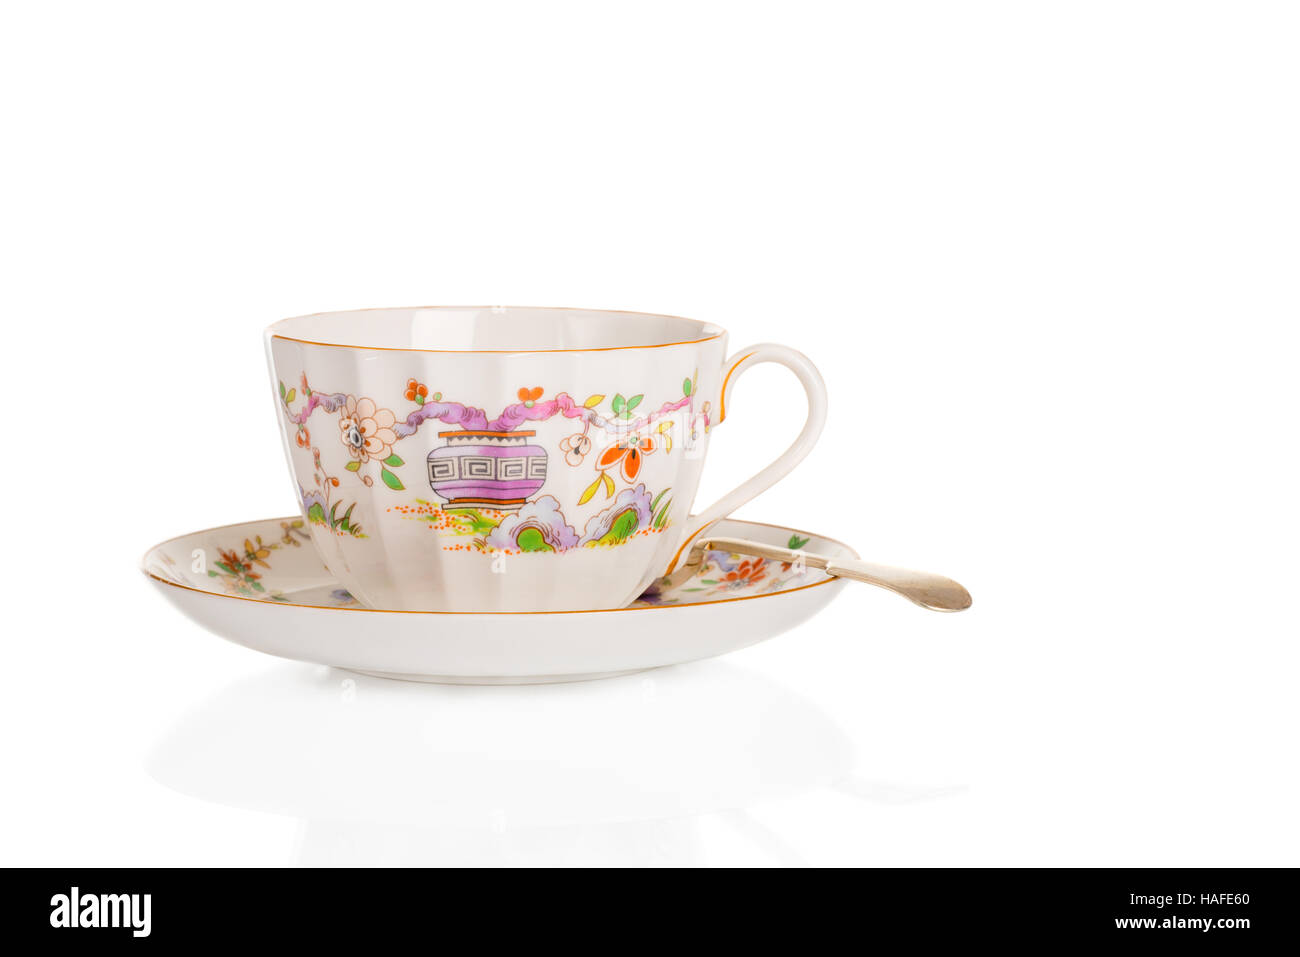 Antique fluted teacup and saucer with spoon on a white background Stock Photo